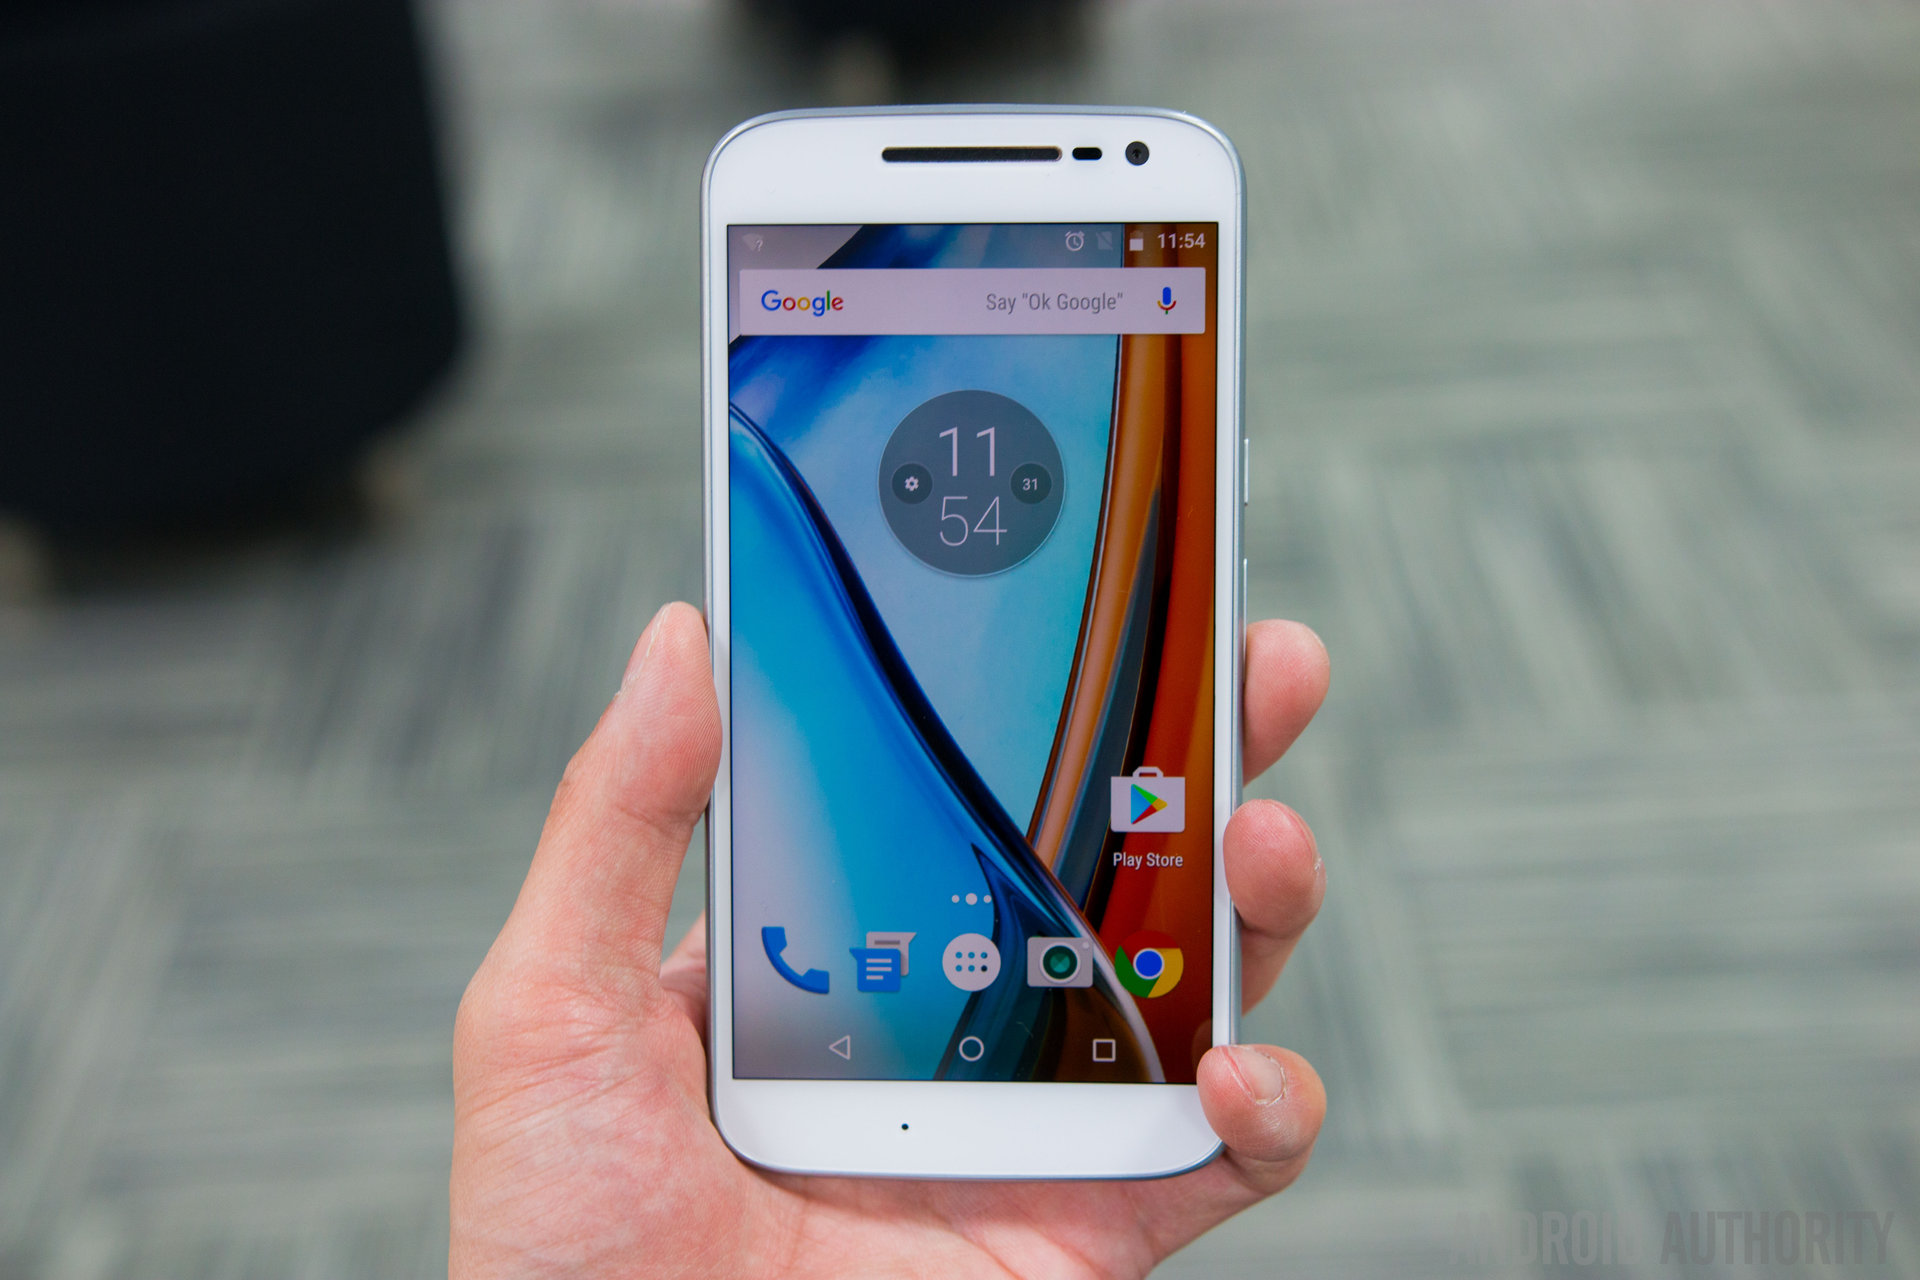 Hands-on with the Moto G4 and G4 Plus - Android Authority